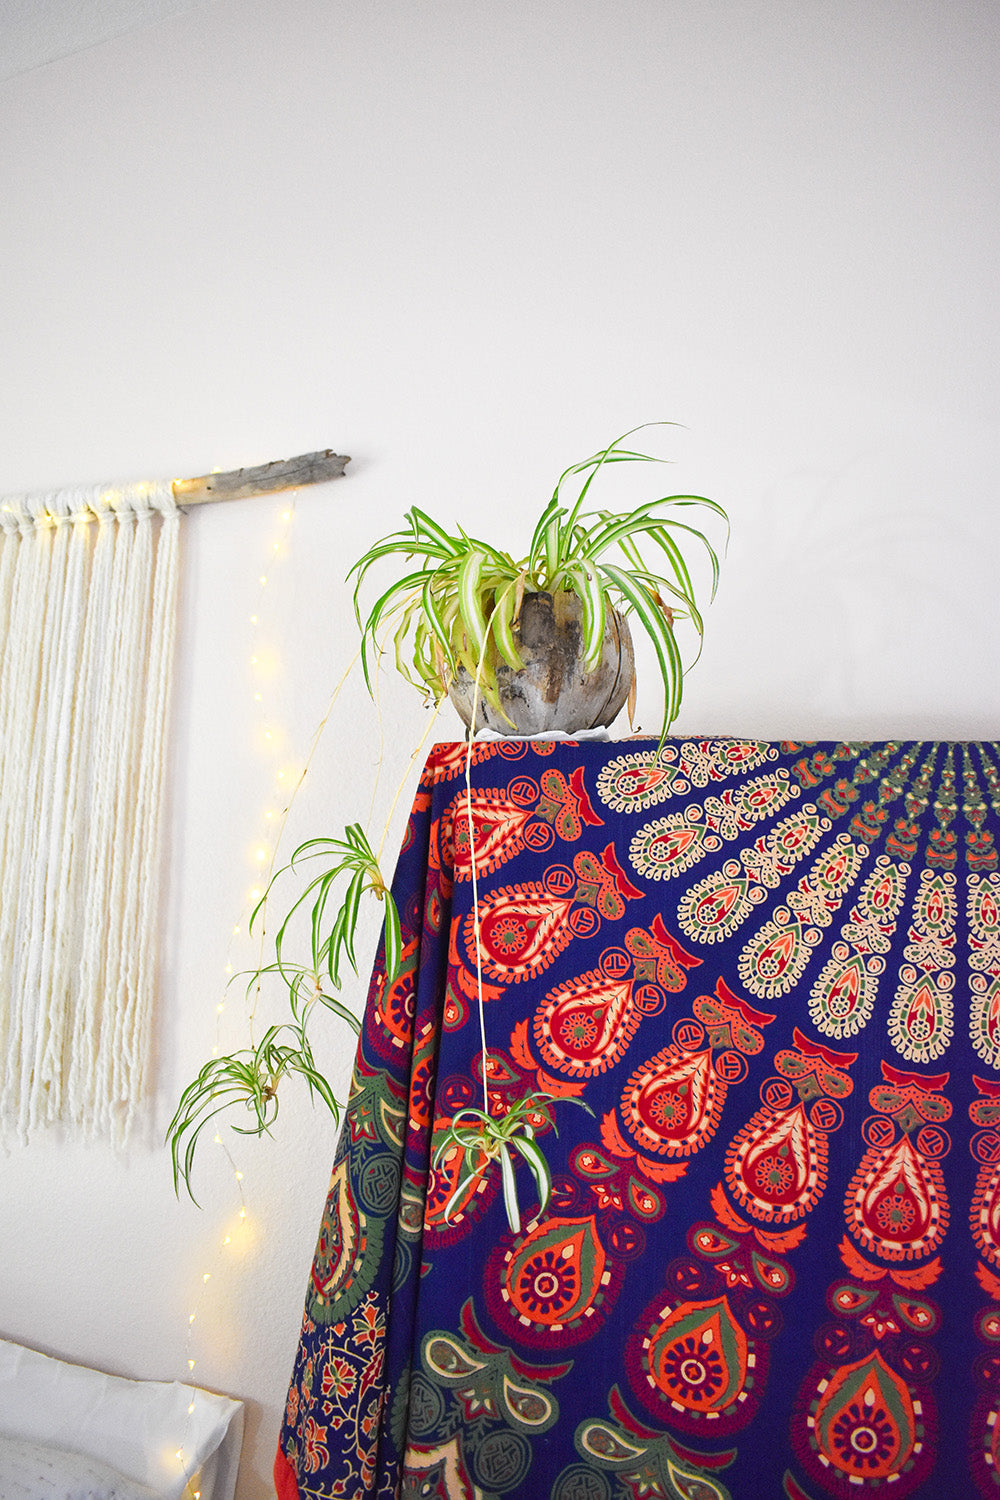 Hippie tapestries update outdated furniture for updated boho home decor. via Davis Taylor Trading Co.